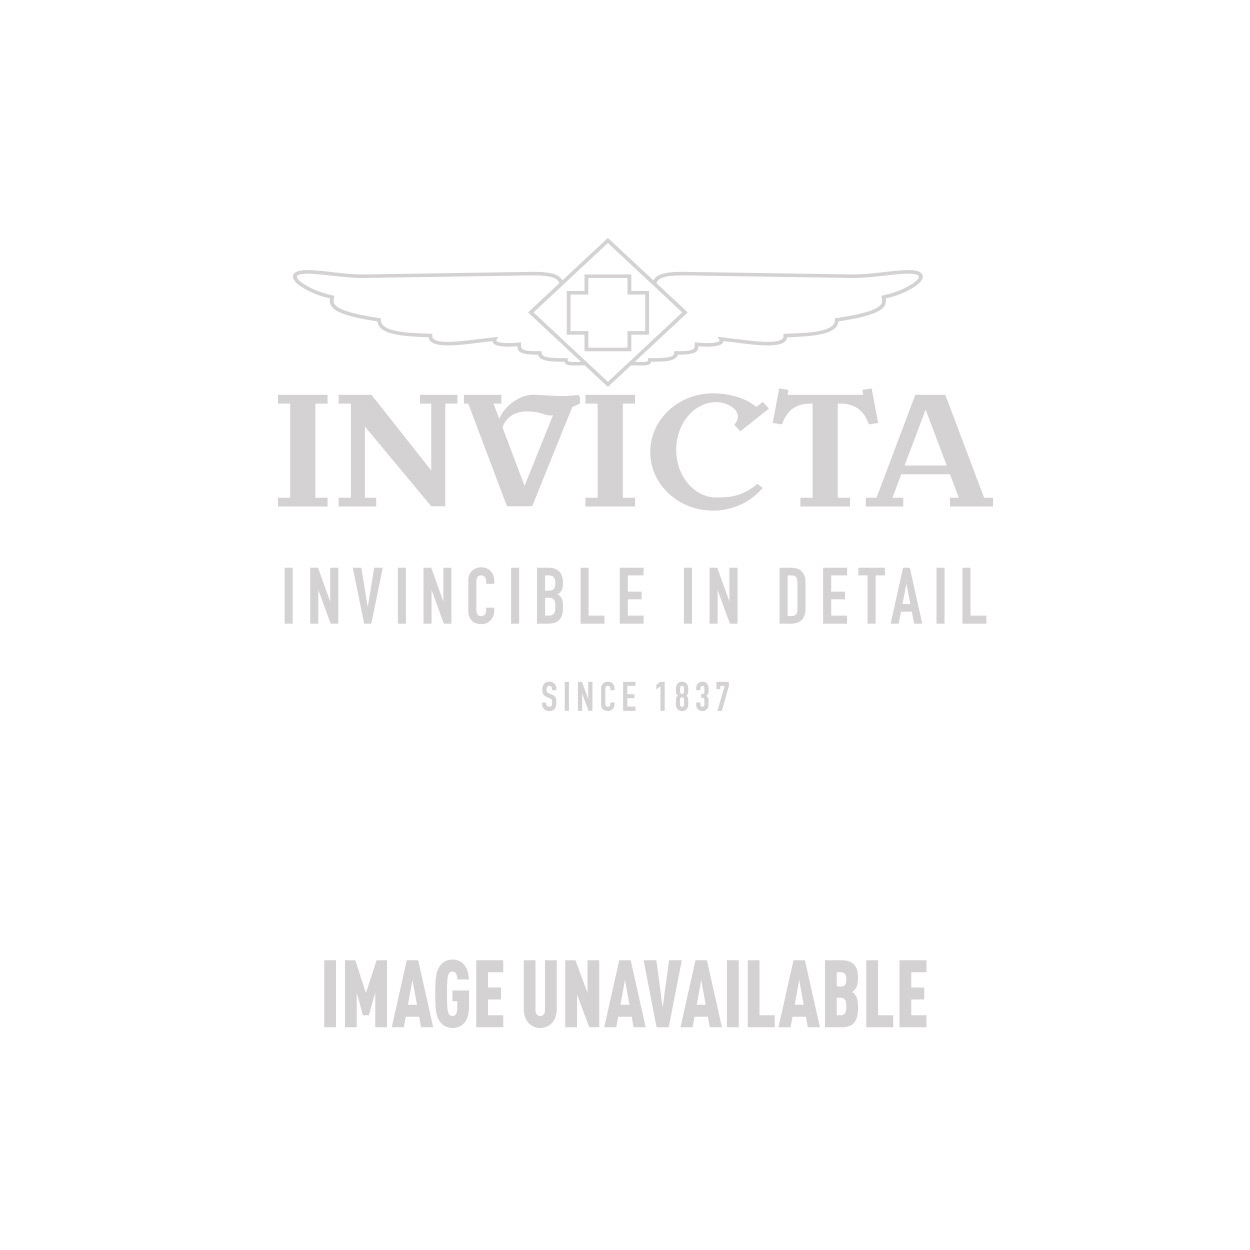 Invicta Coalition Forces Mens Quartz 46 mm Stainless Steel - Model 30452